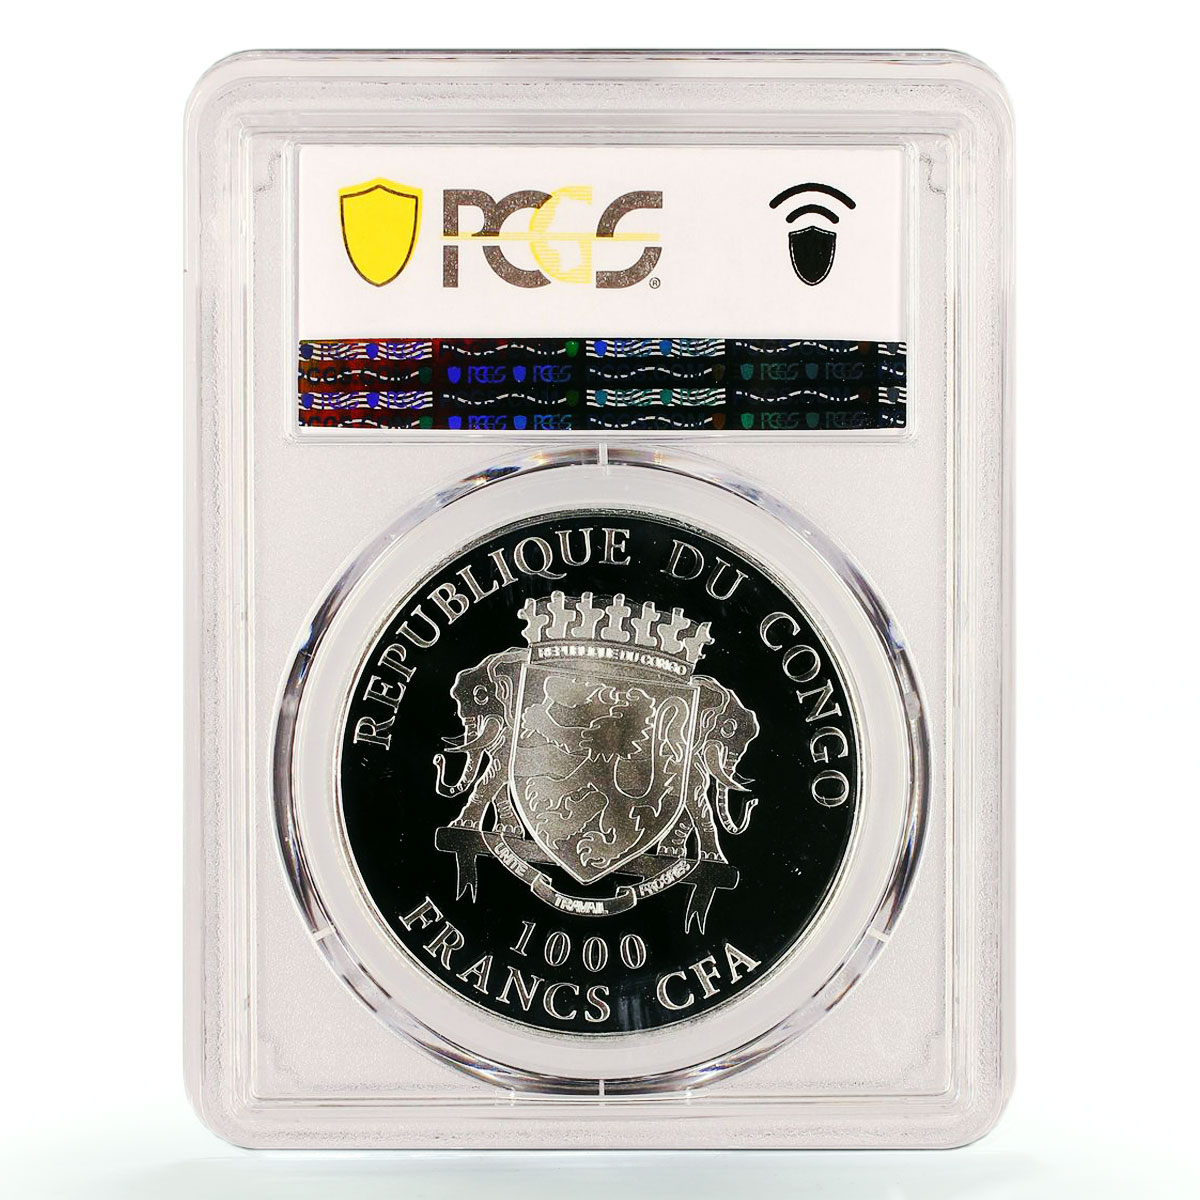 Congo 1000 francs Lunar Year of the Goat Lucky Family PR69 PCGS silver coin 2015